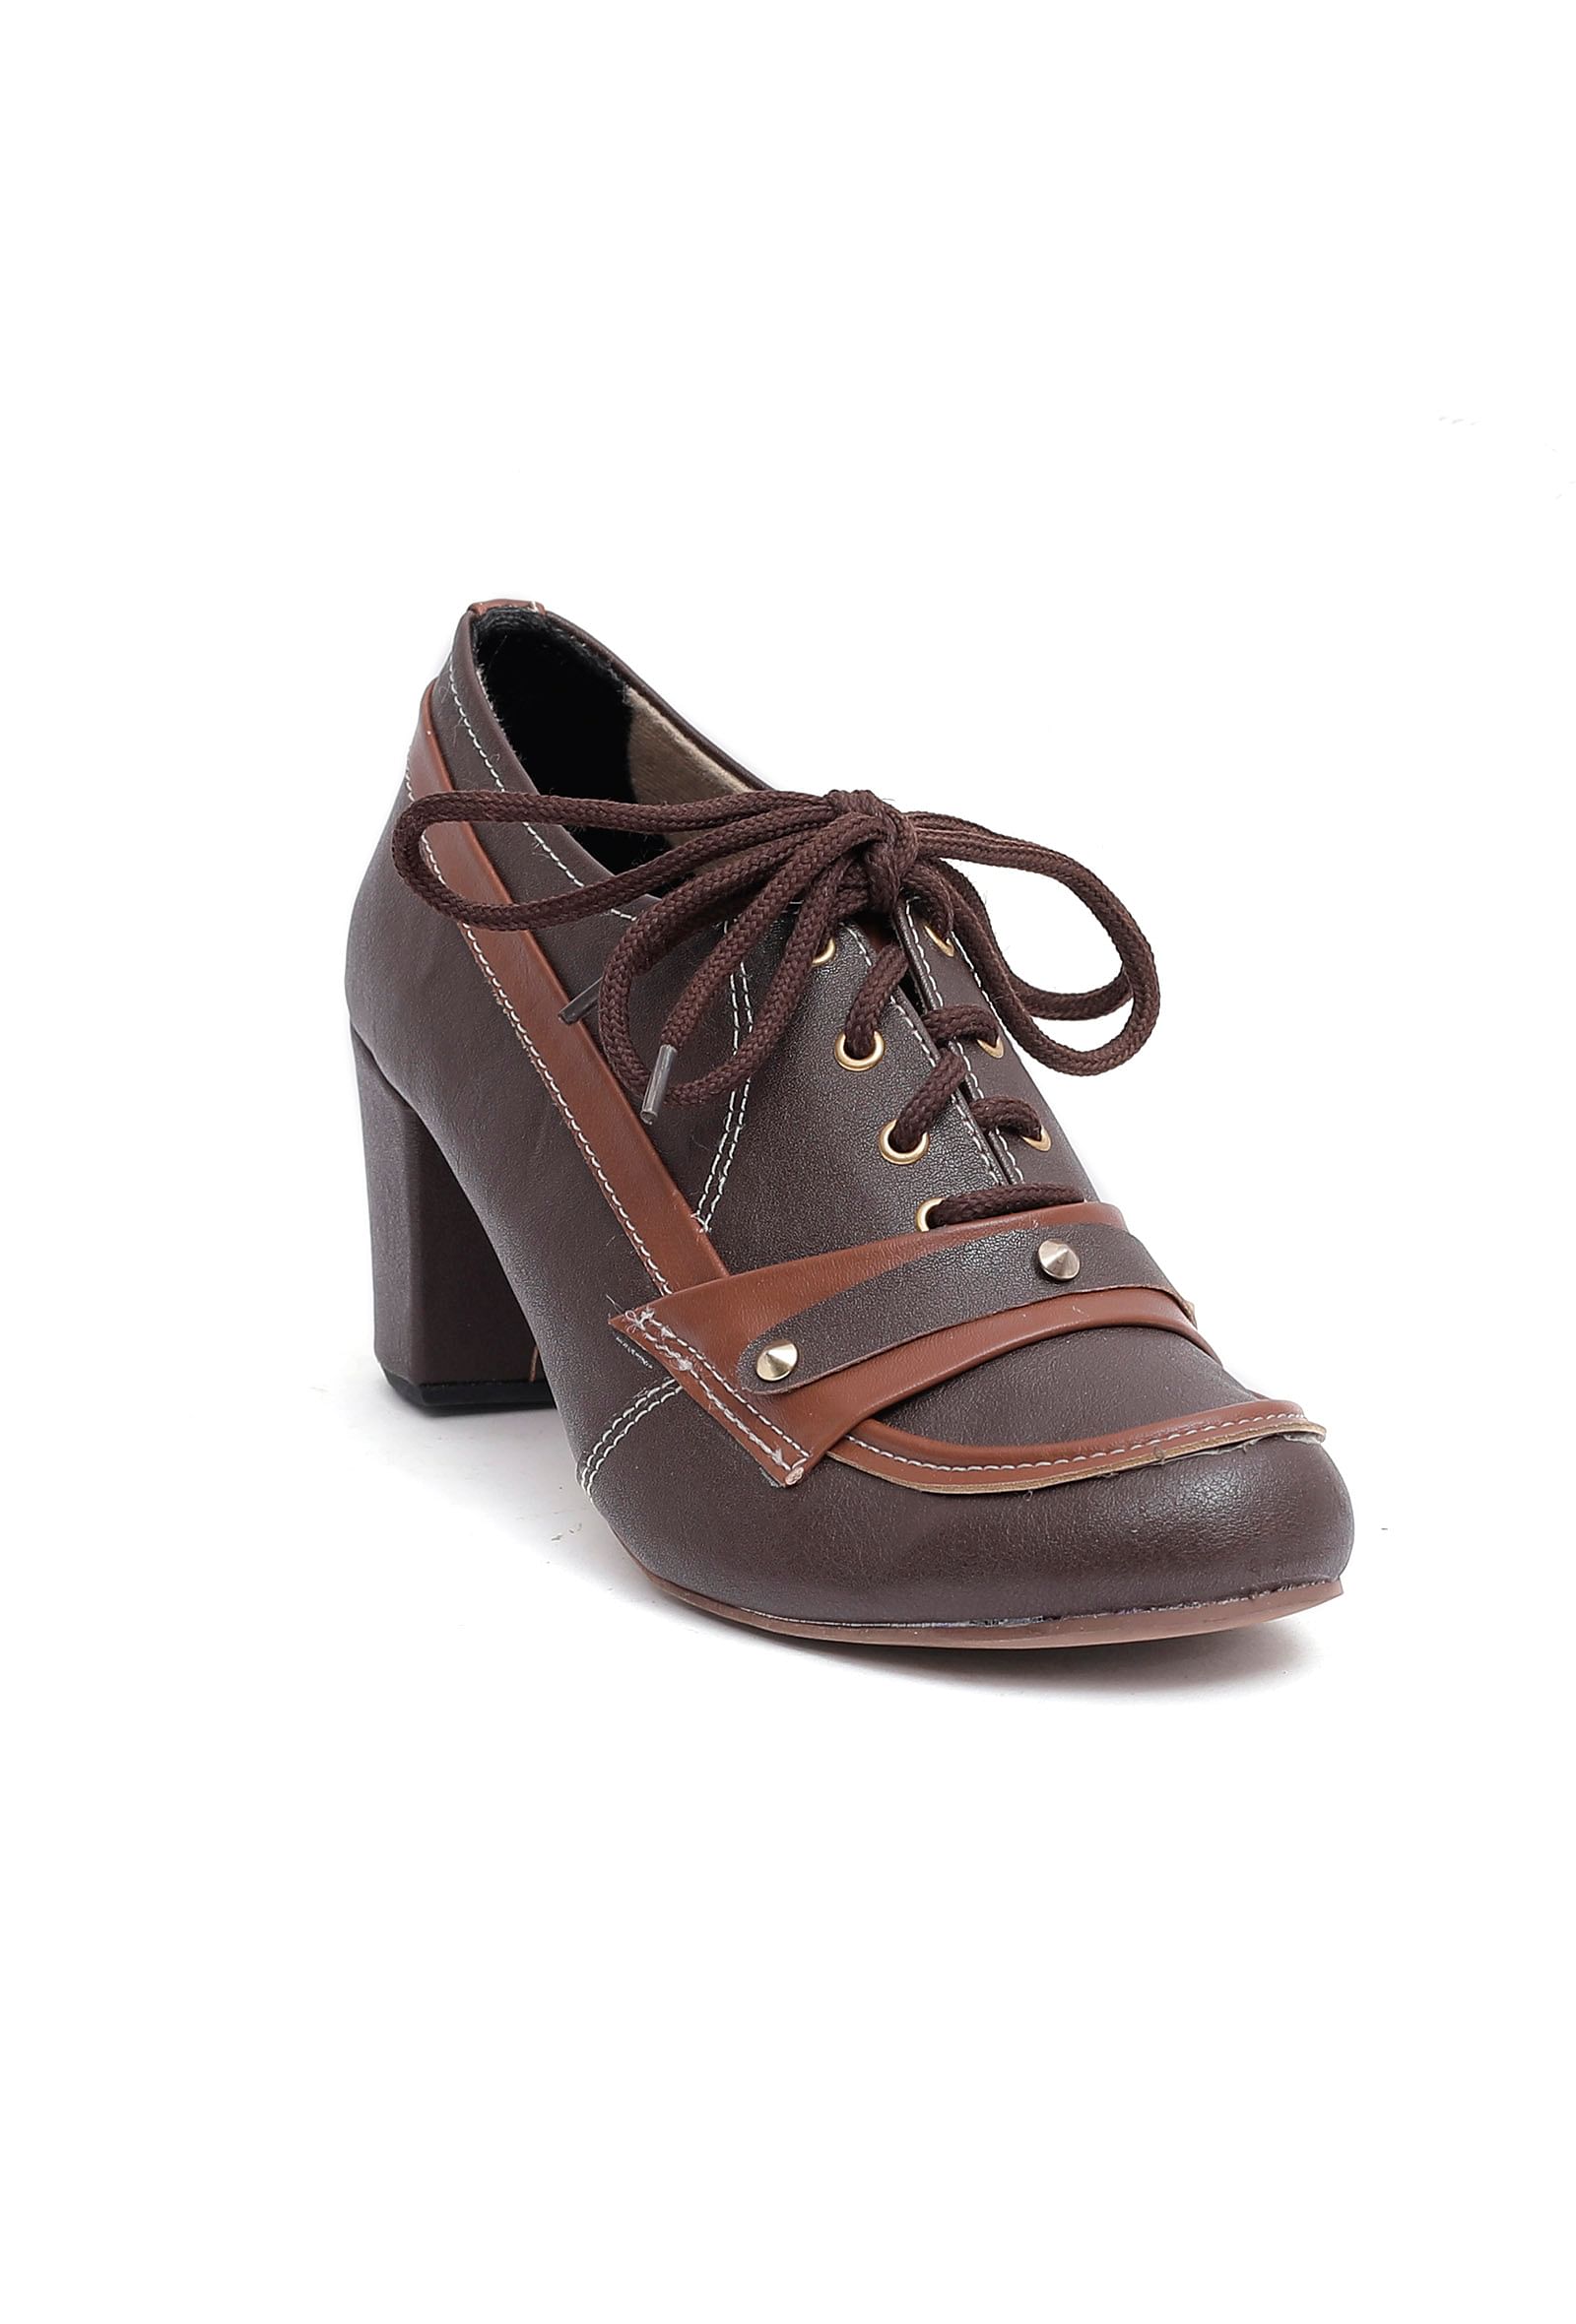 Brown Cruelty Free Leather Rivets Oxford Heel Boots